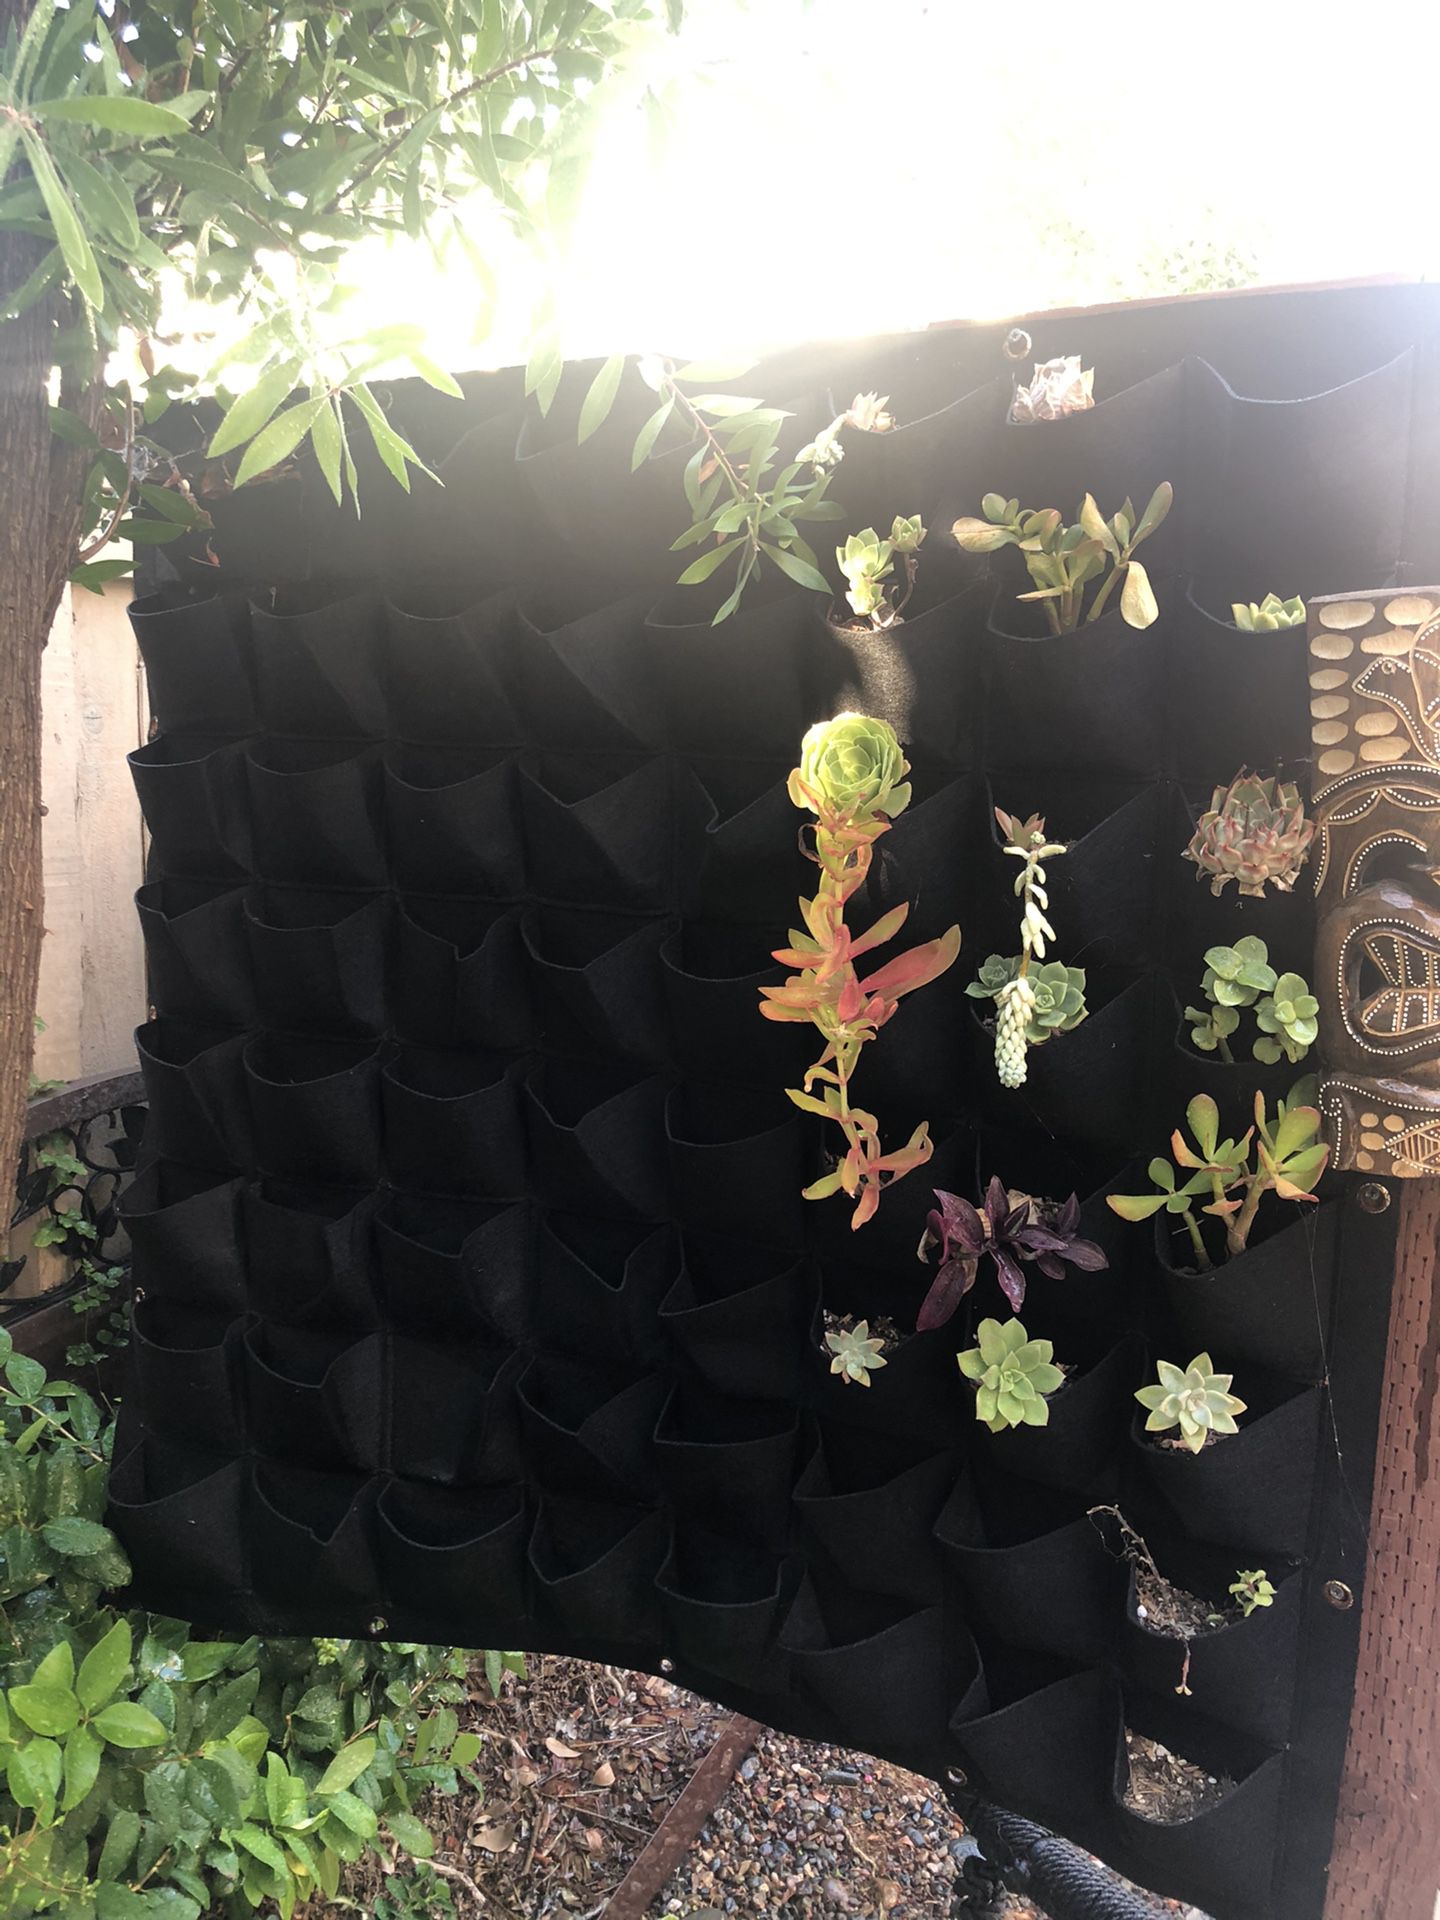 Living wall planter with succulents included